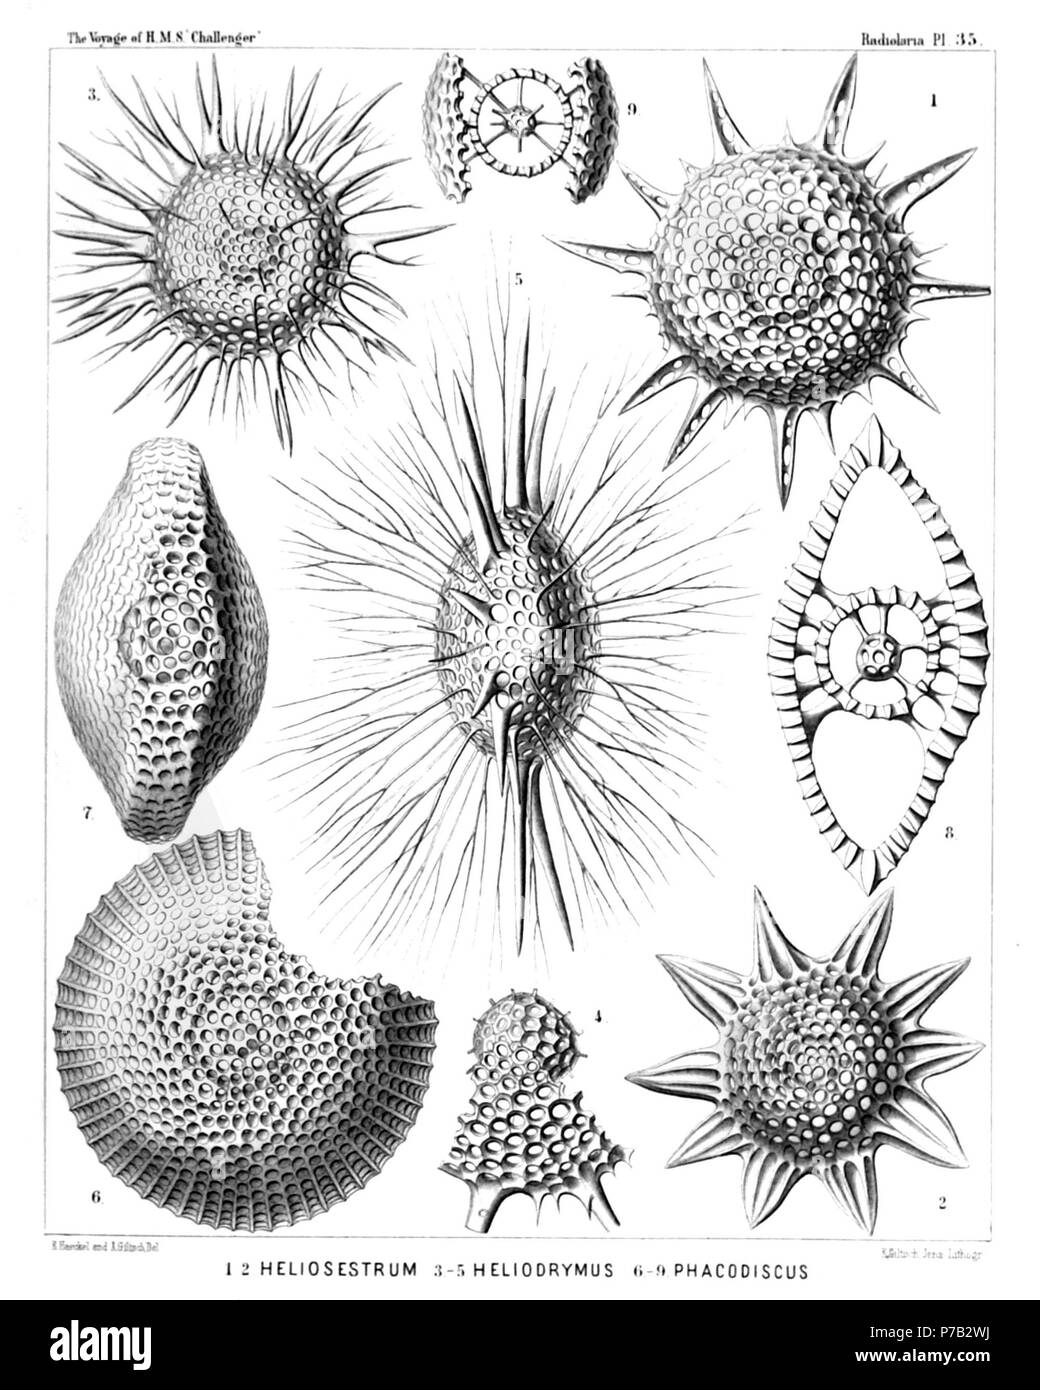 English: Illustration from Report on the Radiolaria collected by H.M.S. Challenger during the years 1873-1876. Part III. Original description follows:  Plate 35. Phacodiscida.  Diam.  Fig. 1. Heliodiscus pertusus, n. sp. (vel Heliosestrum pertusum), × 400  Irregular form with ten (instead of eight) larger latticed spines.  Fig. 2. Heliodiscus glyphodon, n. sp. (vel Heliosestrum glyphodon), × 300  Fig. 3. Heliodrymus ramosus, n. sp., × 300  Fig. 4. Heliodrymus ramosus, n. sp., × 500  Medullary shell and a segment of the disk.  Fig. 5. Heliodrymus viminalis, n. sp., × 400  Marginal view.  Fig. 6 Stock Photo